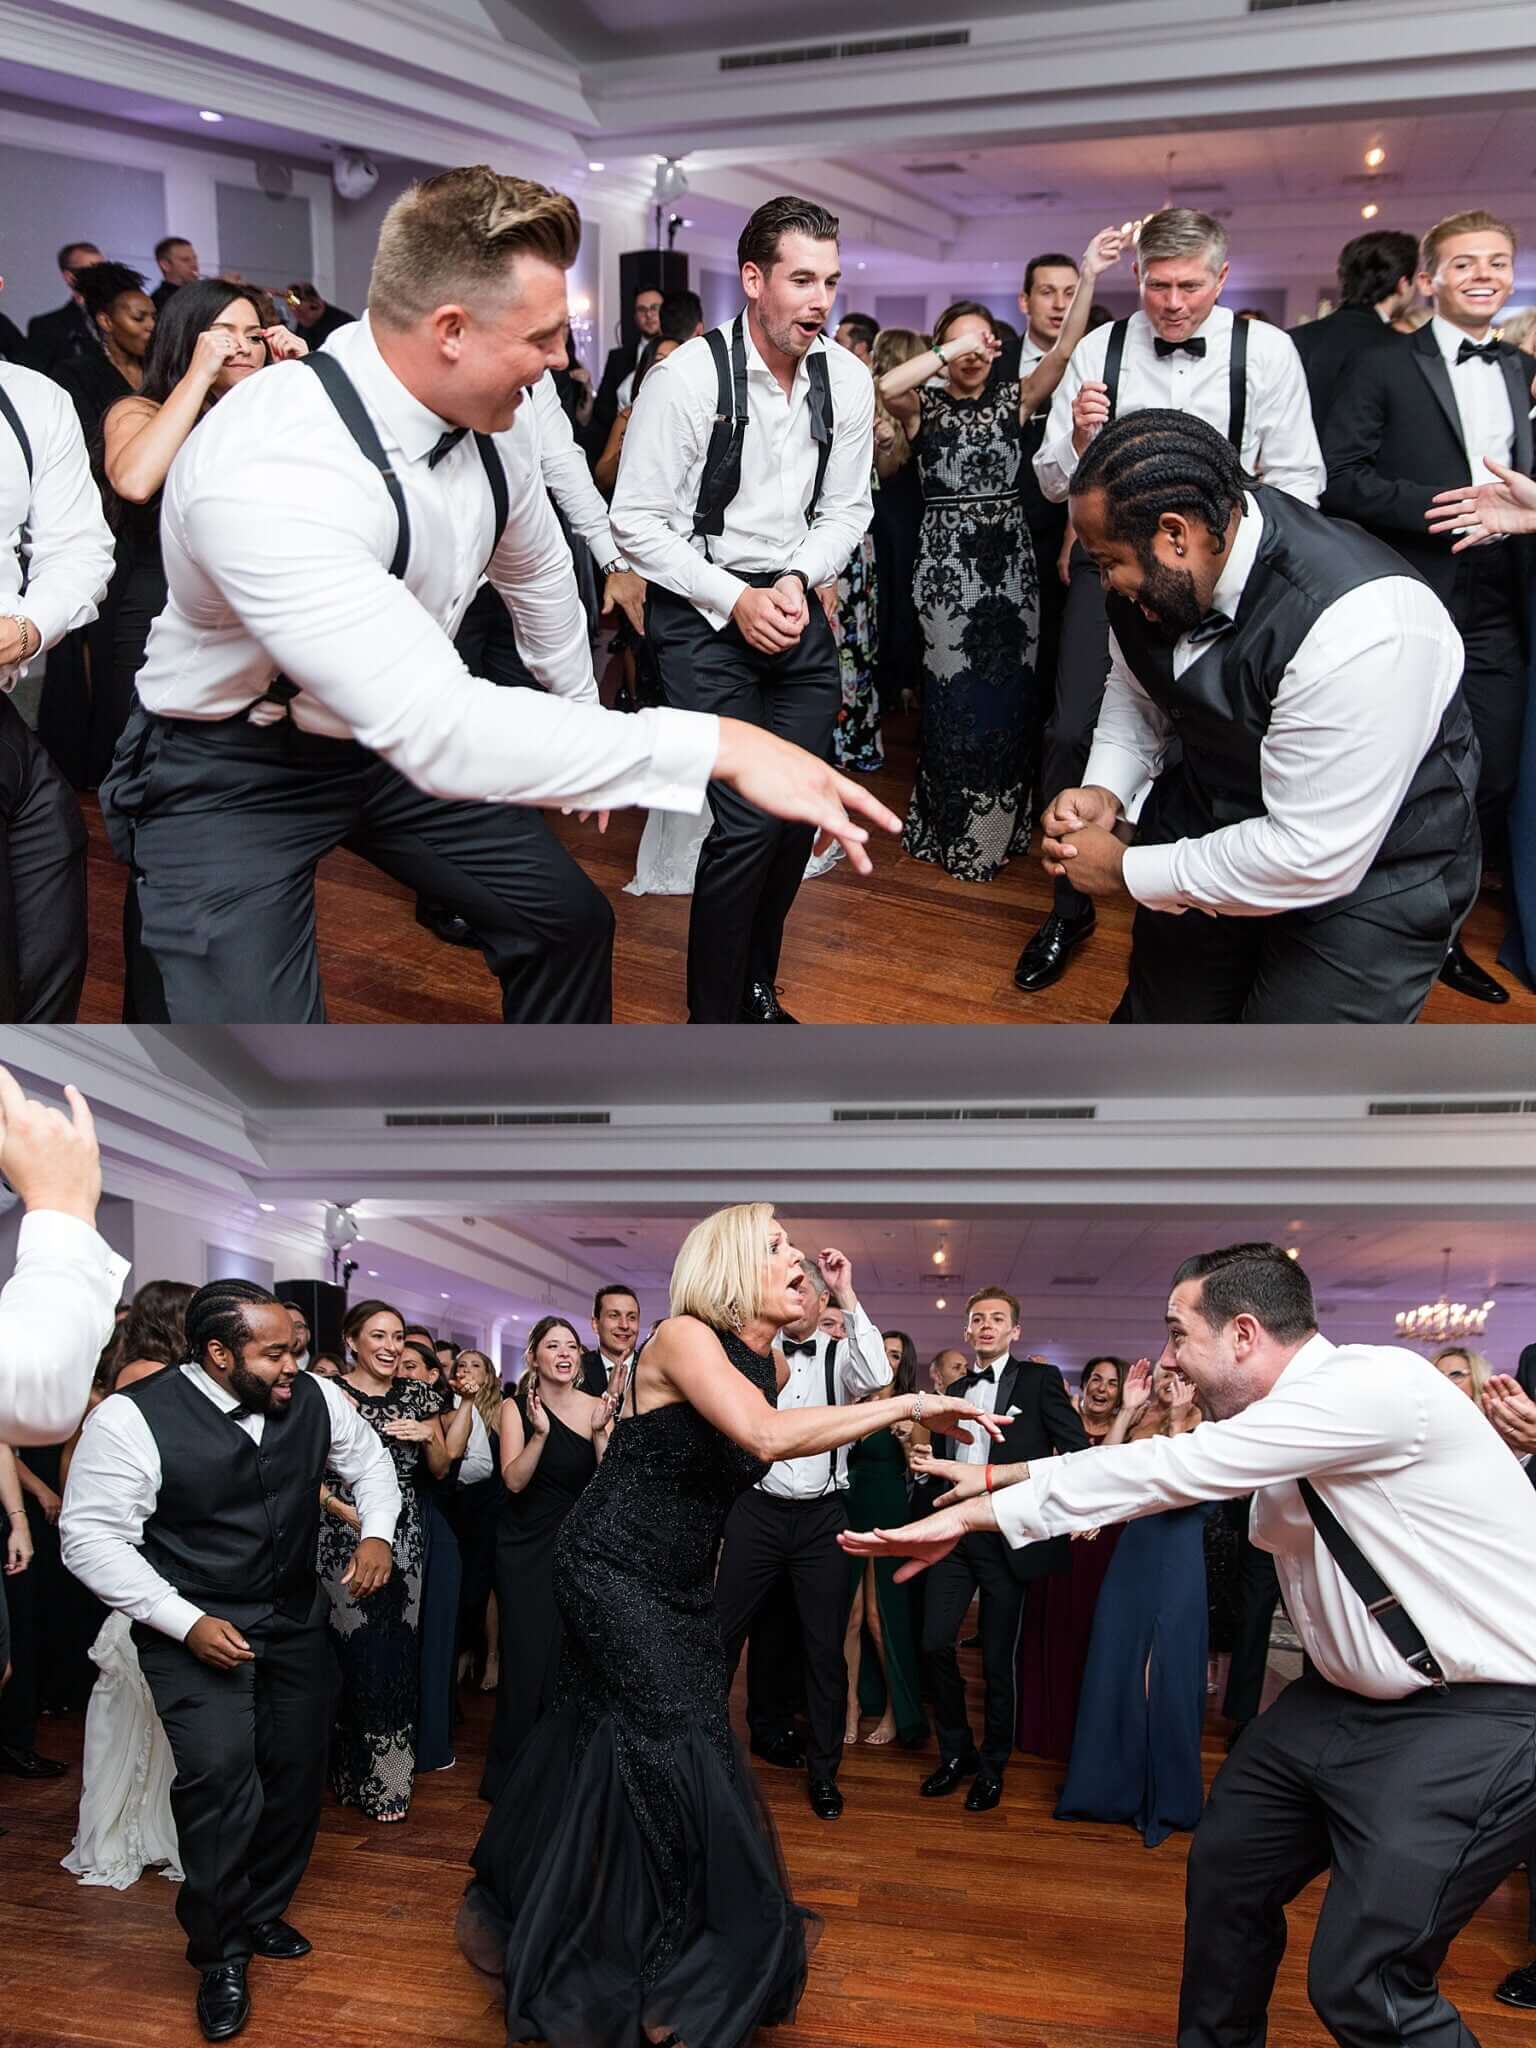 A group of people dancing on the dance floor at a NJ wedding.